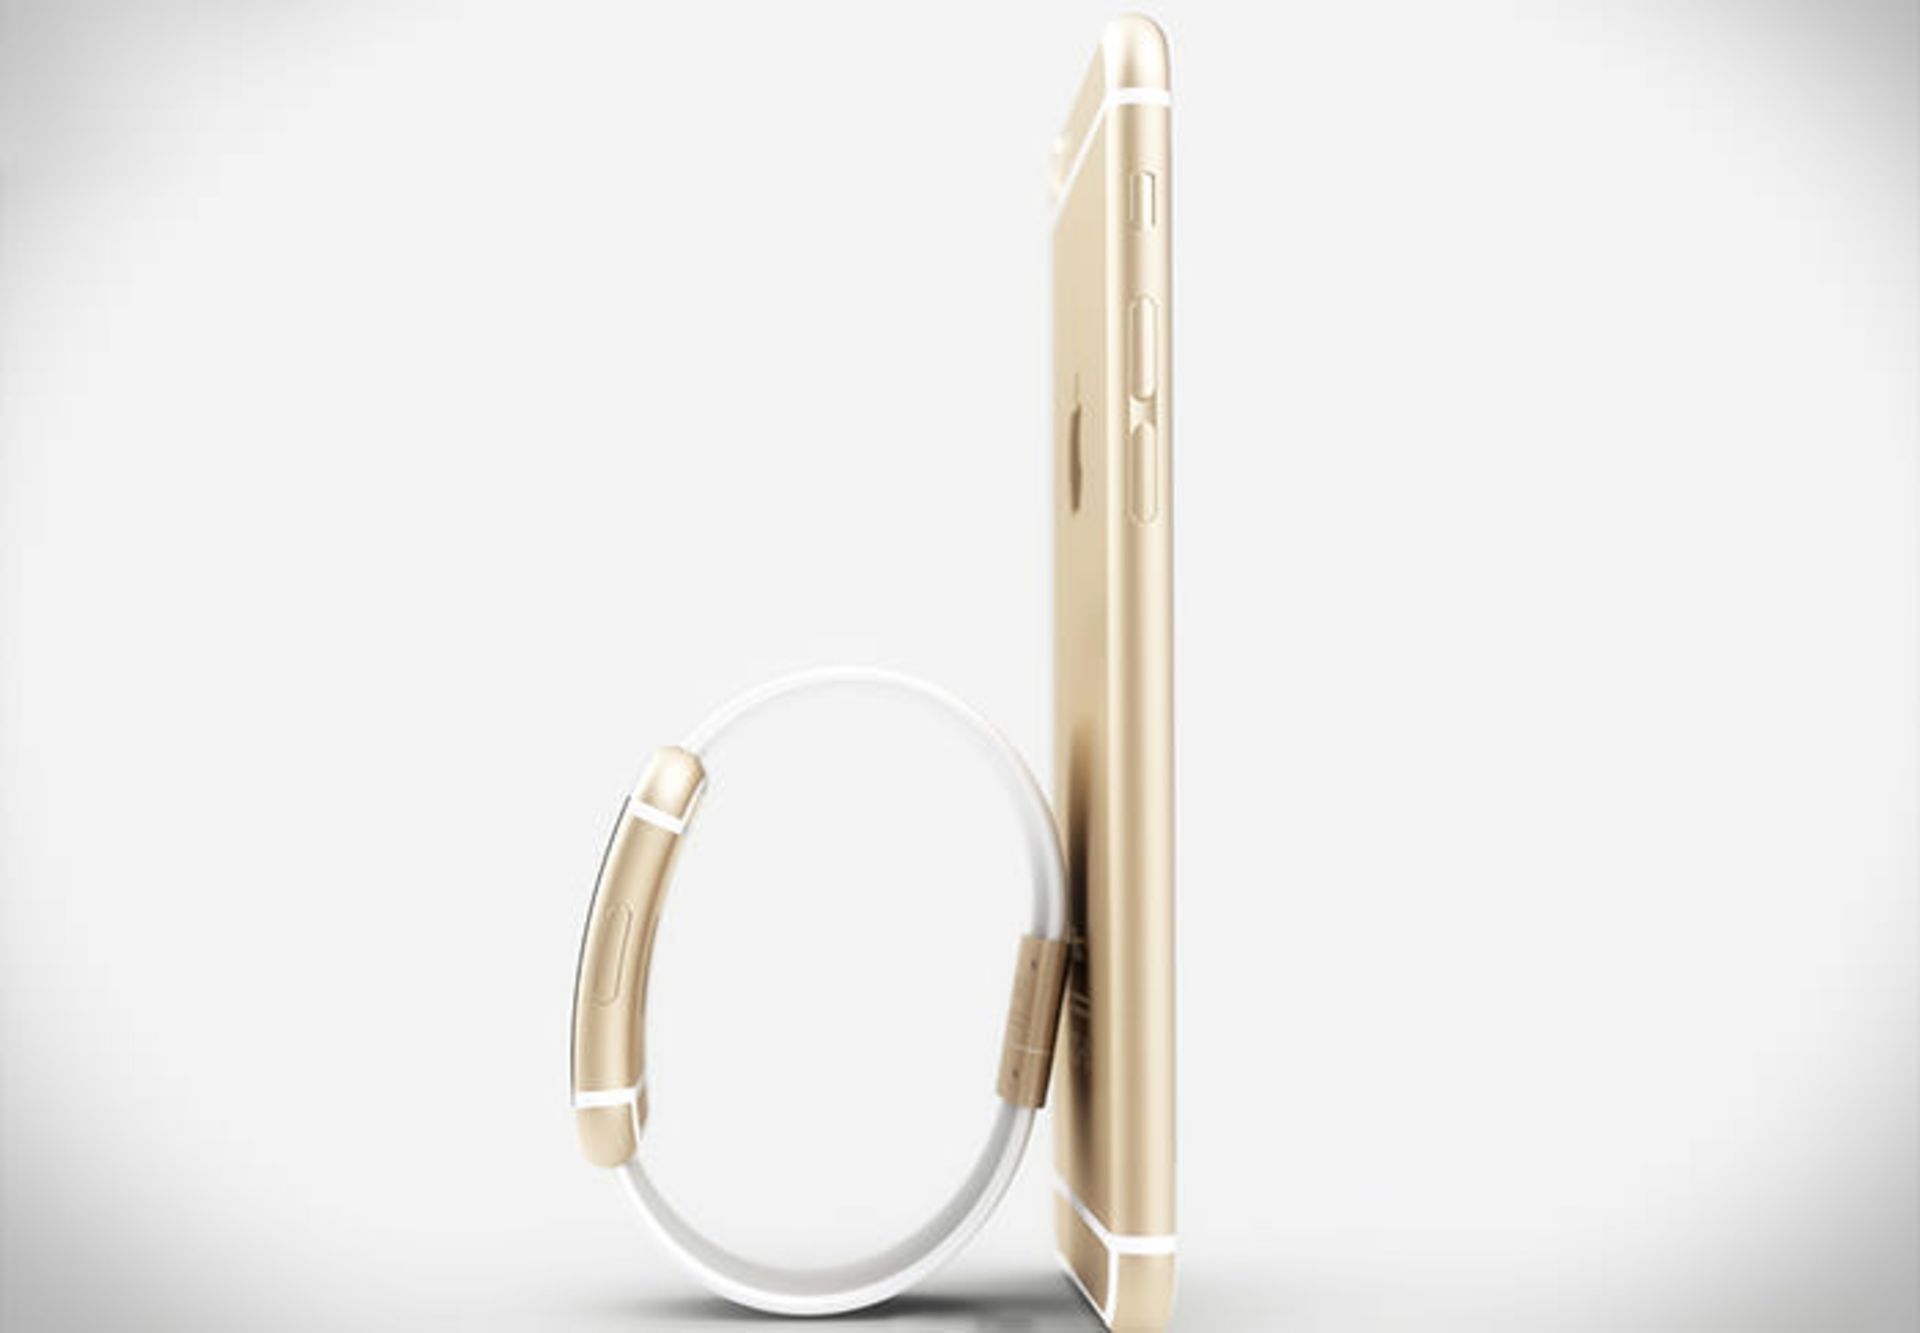 3Apple-iWatch-concept-shows-dreamy-curves-iPhone-esque-looks